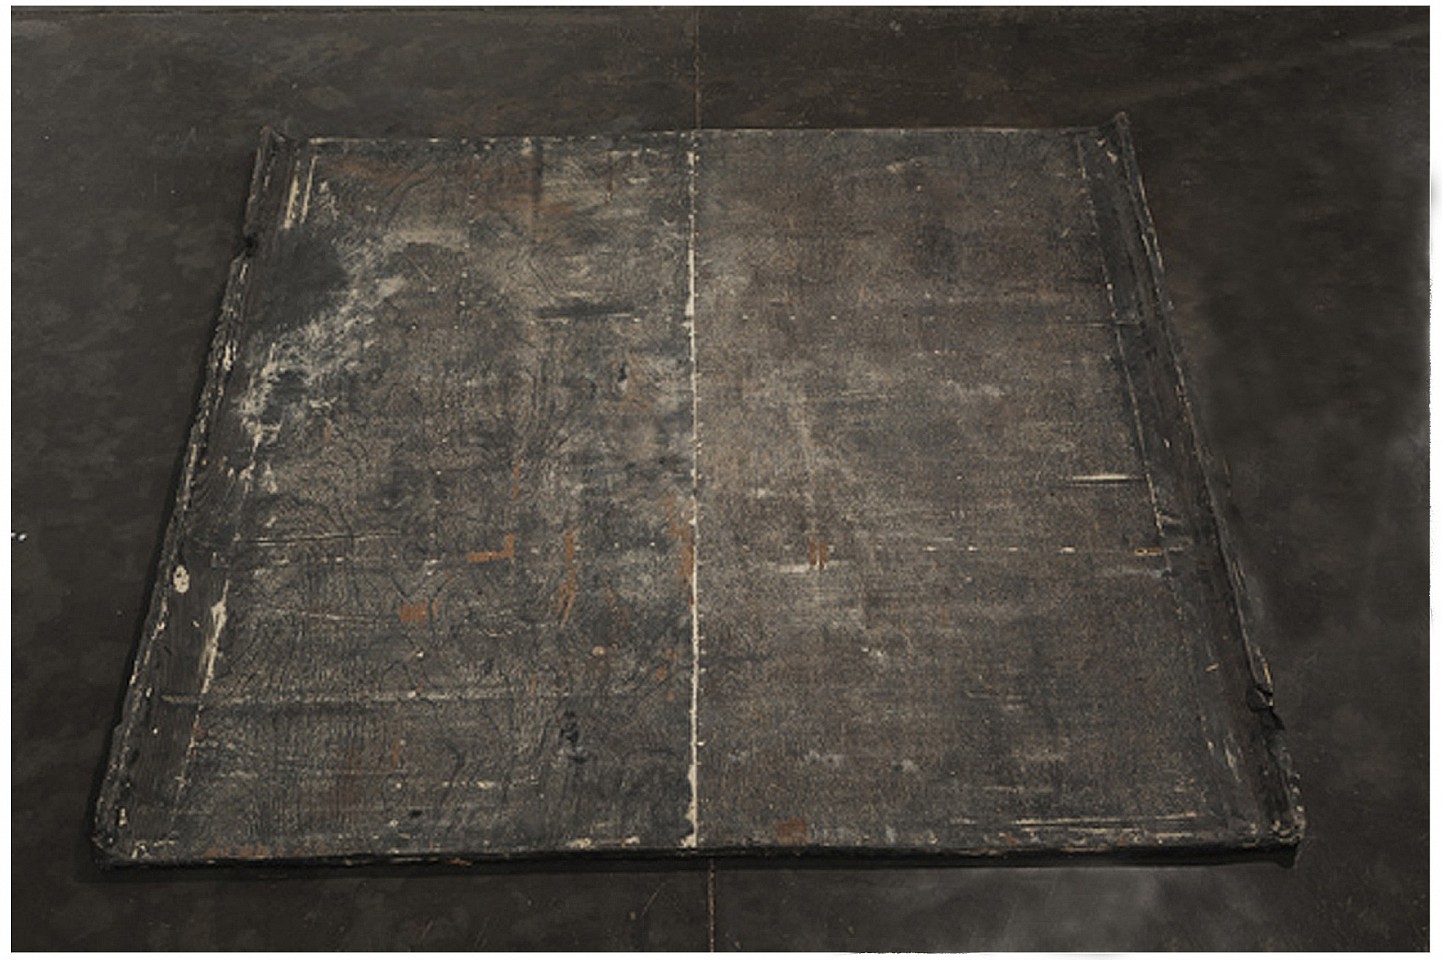 Hemali Bhuta
Flooring (part of Point-Shift and Quoted Objects), 2012-2013
latex rubber smeared with P.O.P., 6 feet x 6 feet